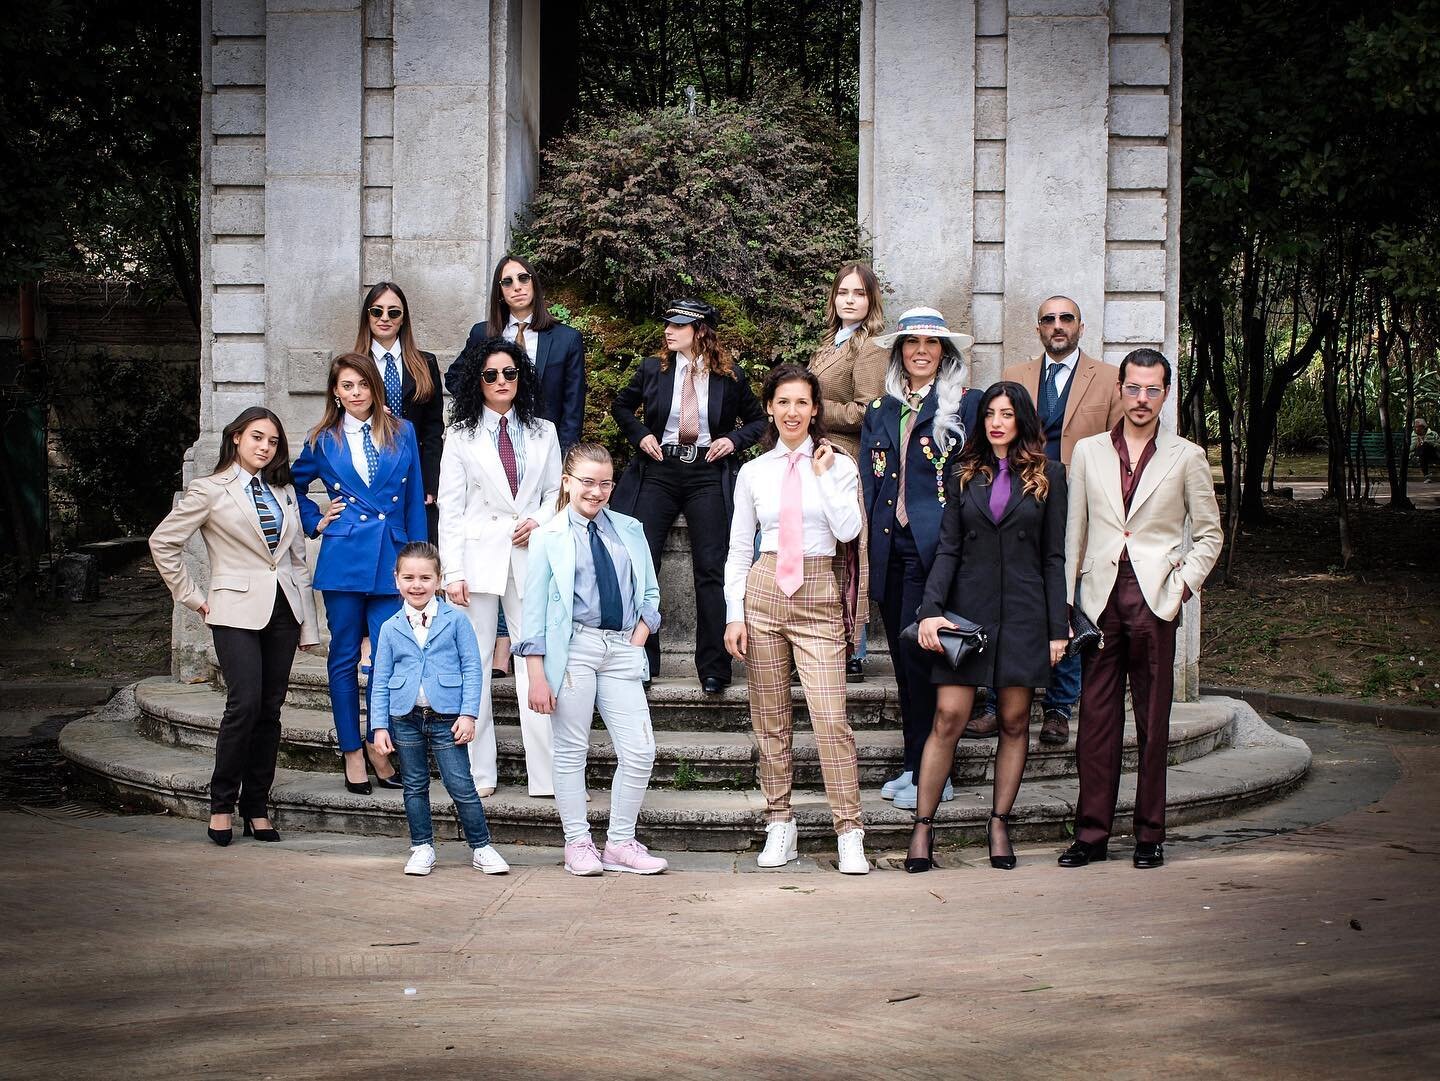 Suit Meet 2022

Last year I had the pleasure of being interviewed by @dlm_magazine_italy 
A magazine based out of Salerno whose mission is to change the way women are perceived when we wear suits and ties.

For those of us who grew up in metropolitan